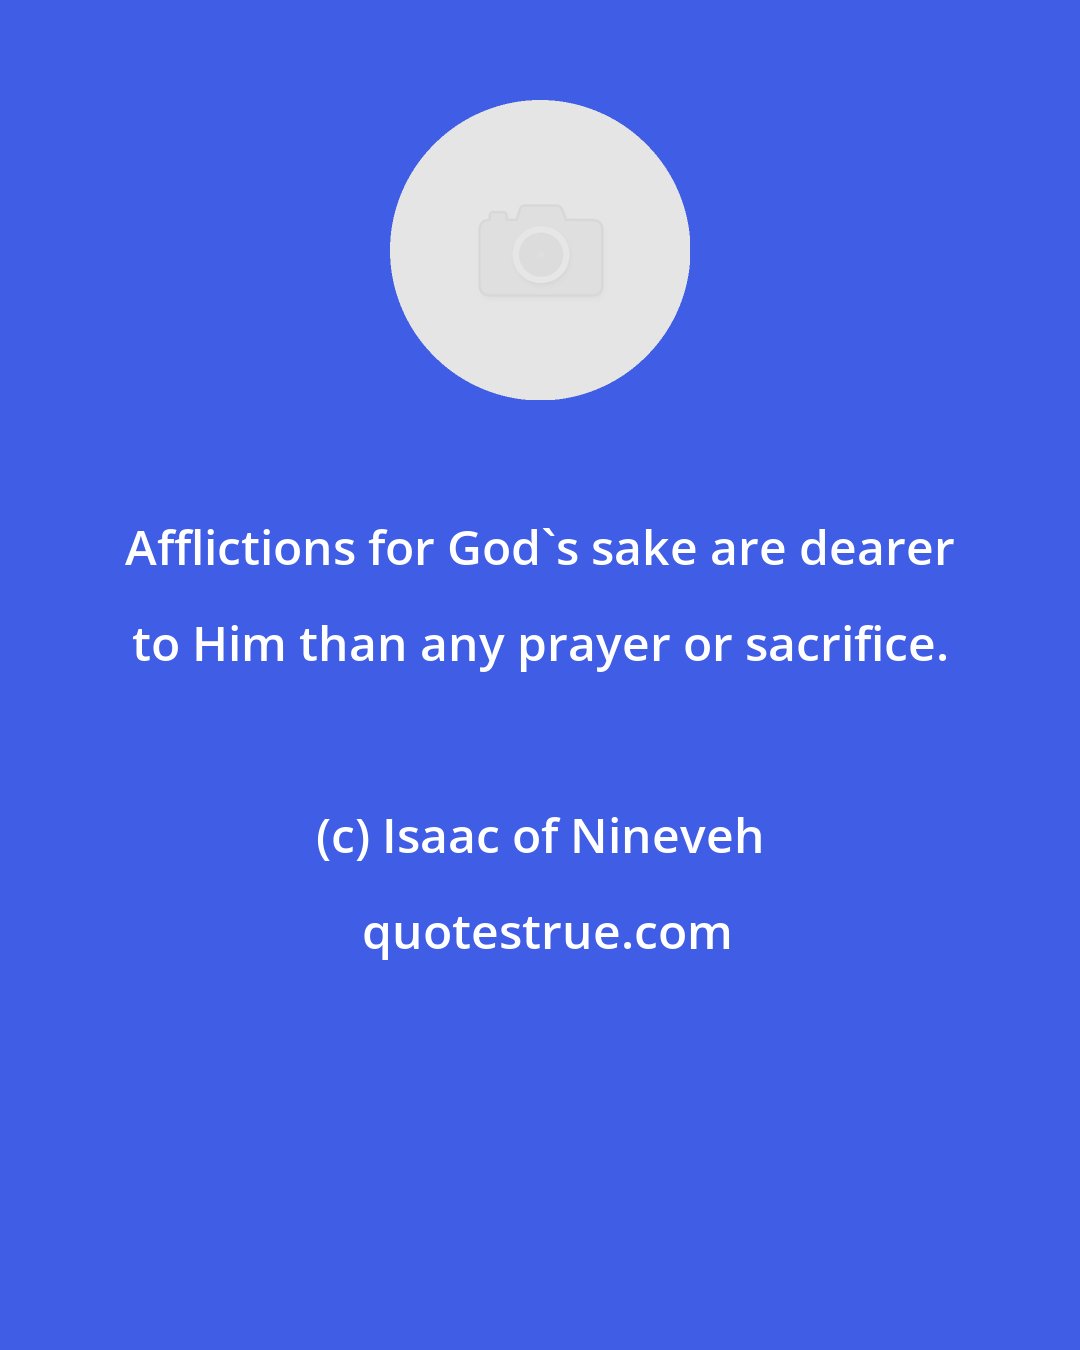 Isaac of Nineveh: Afflictions for God's sake are dearer to Him than any prayer or sacrifice.